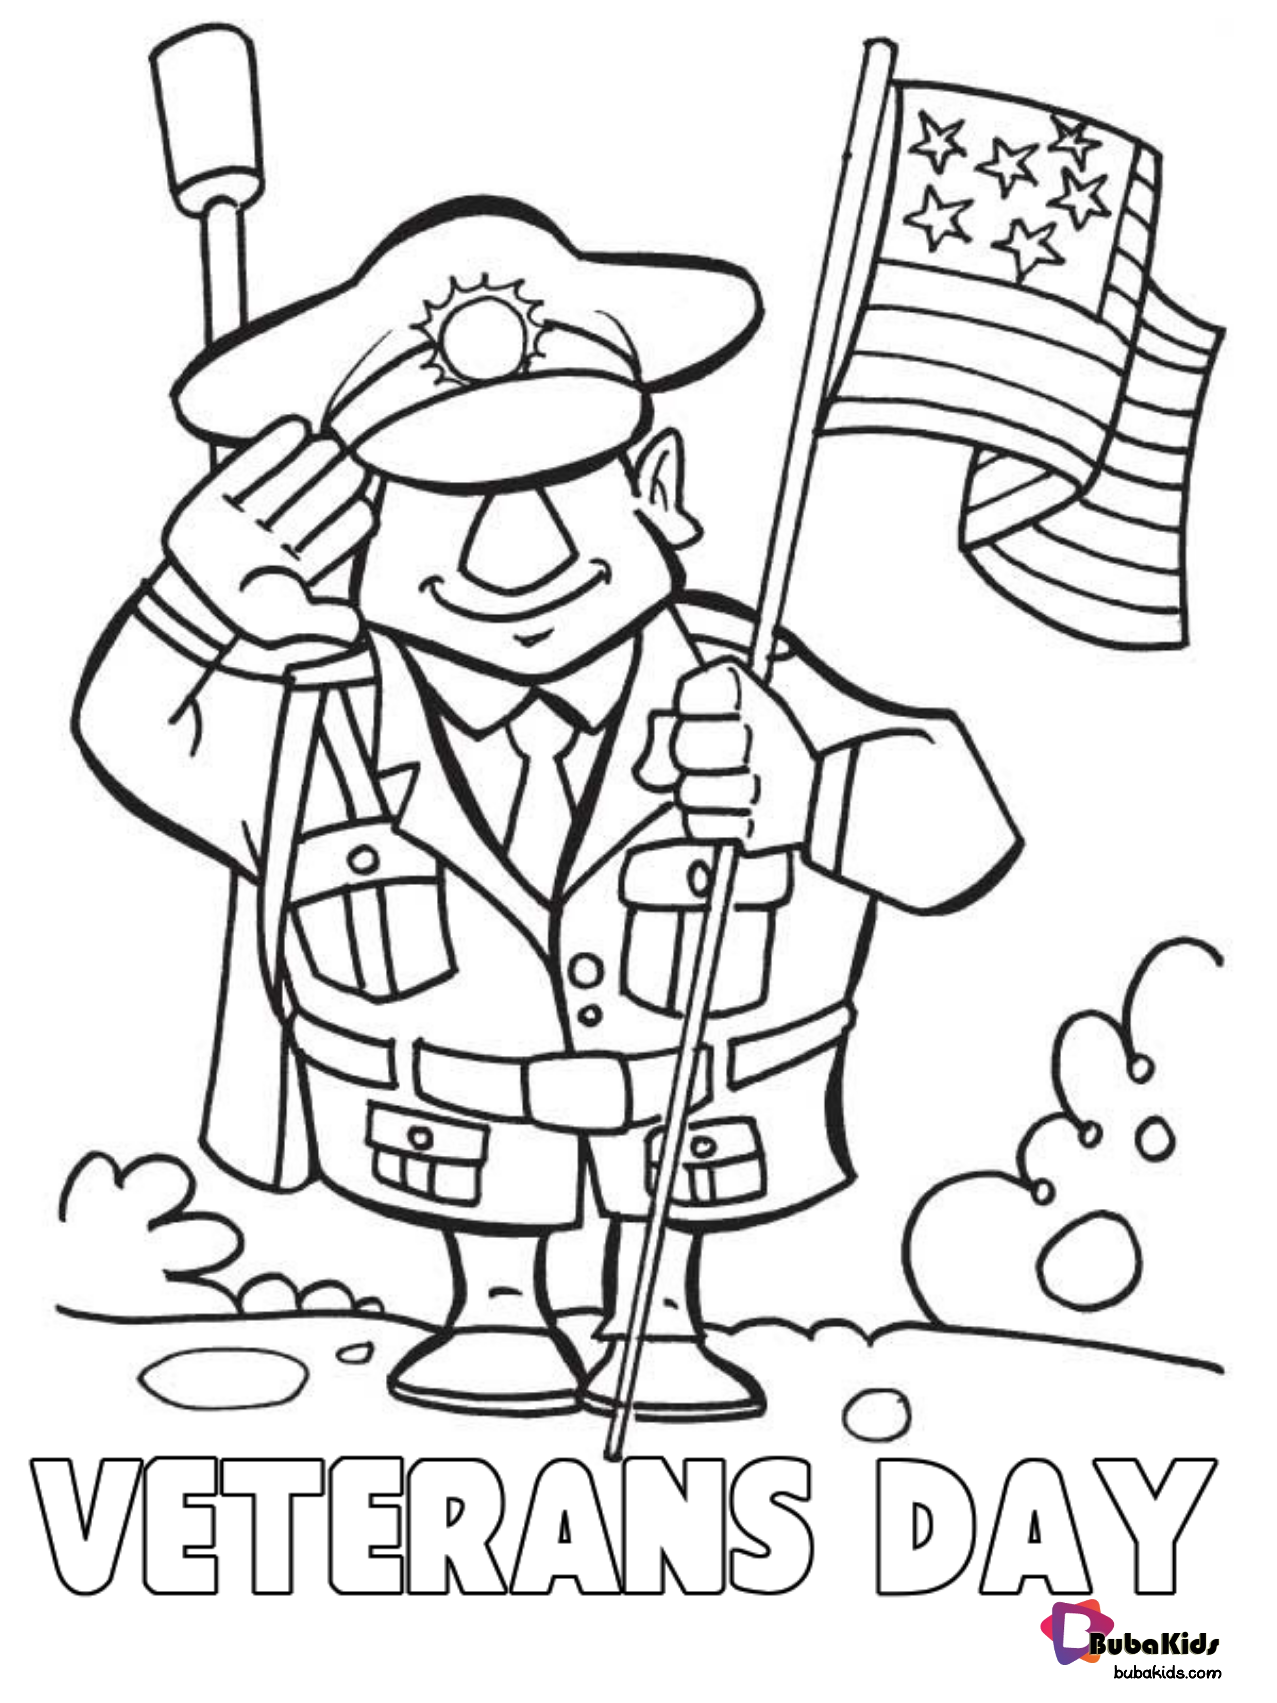 Veterans Day printable coloring pages.